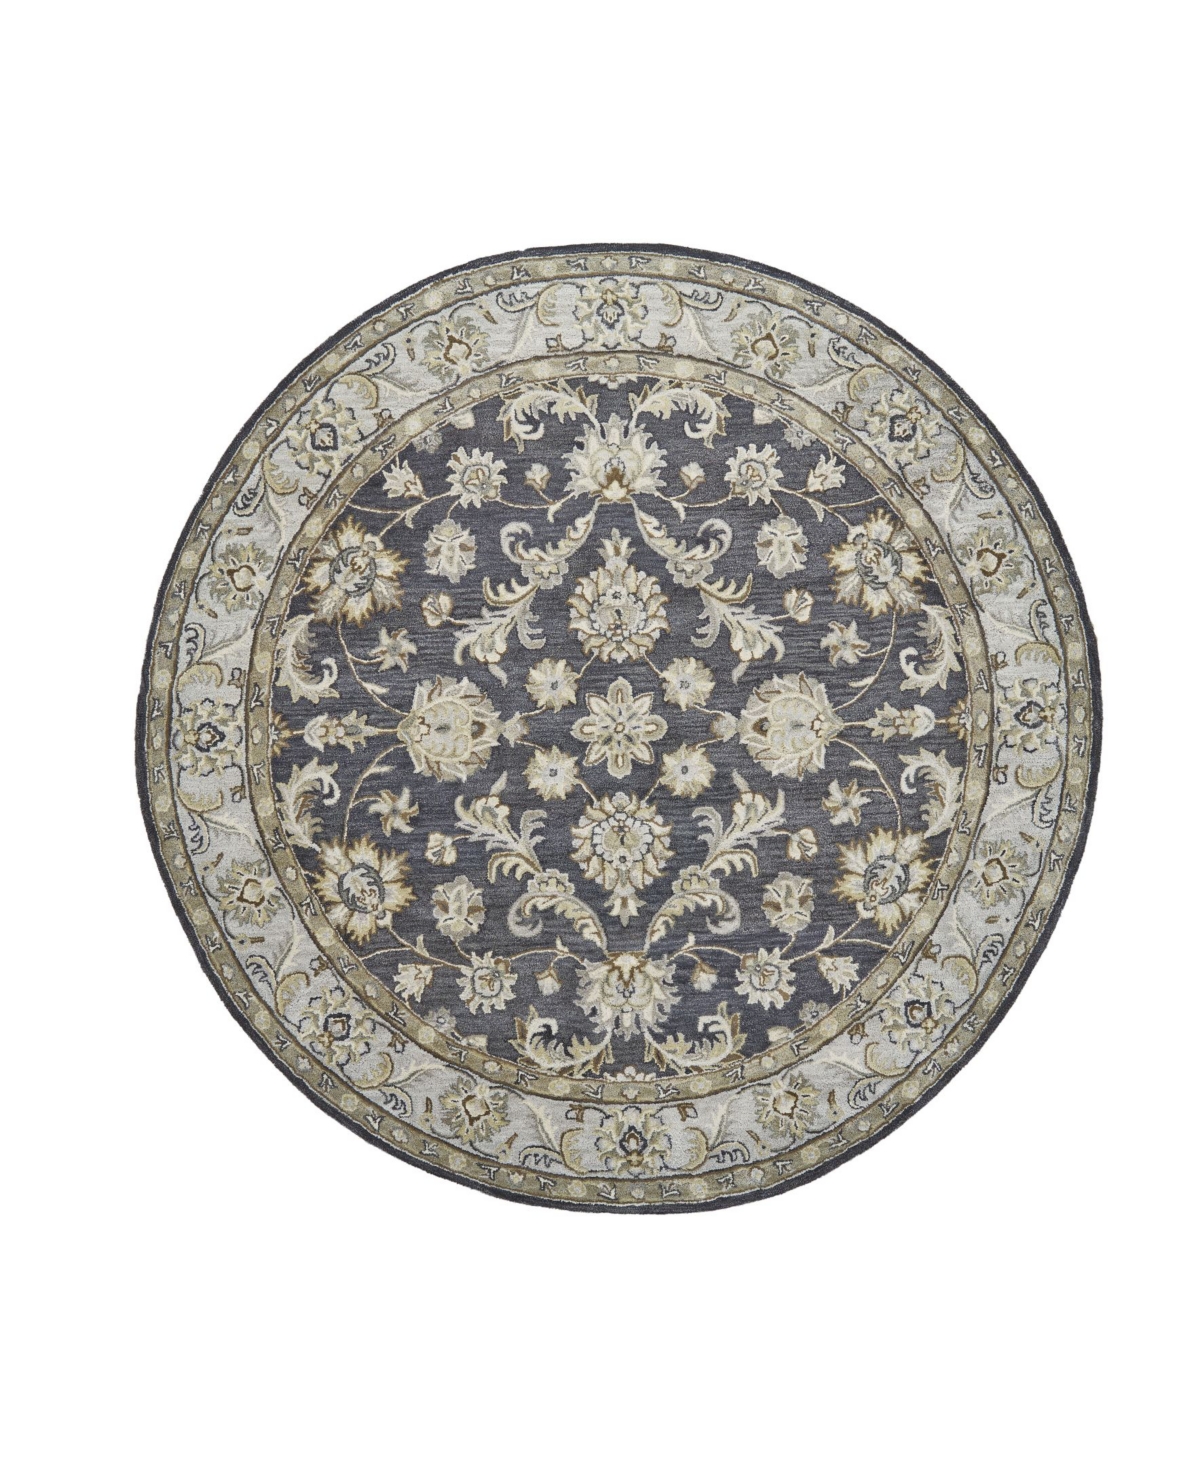 Feizy Zoie R8397 Charcoal 10' x 10' Round Rug - Charcoal